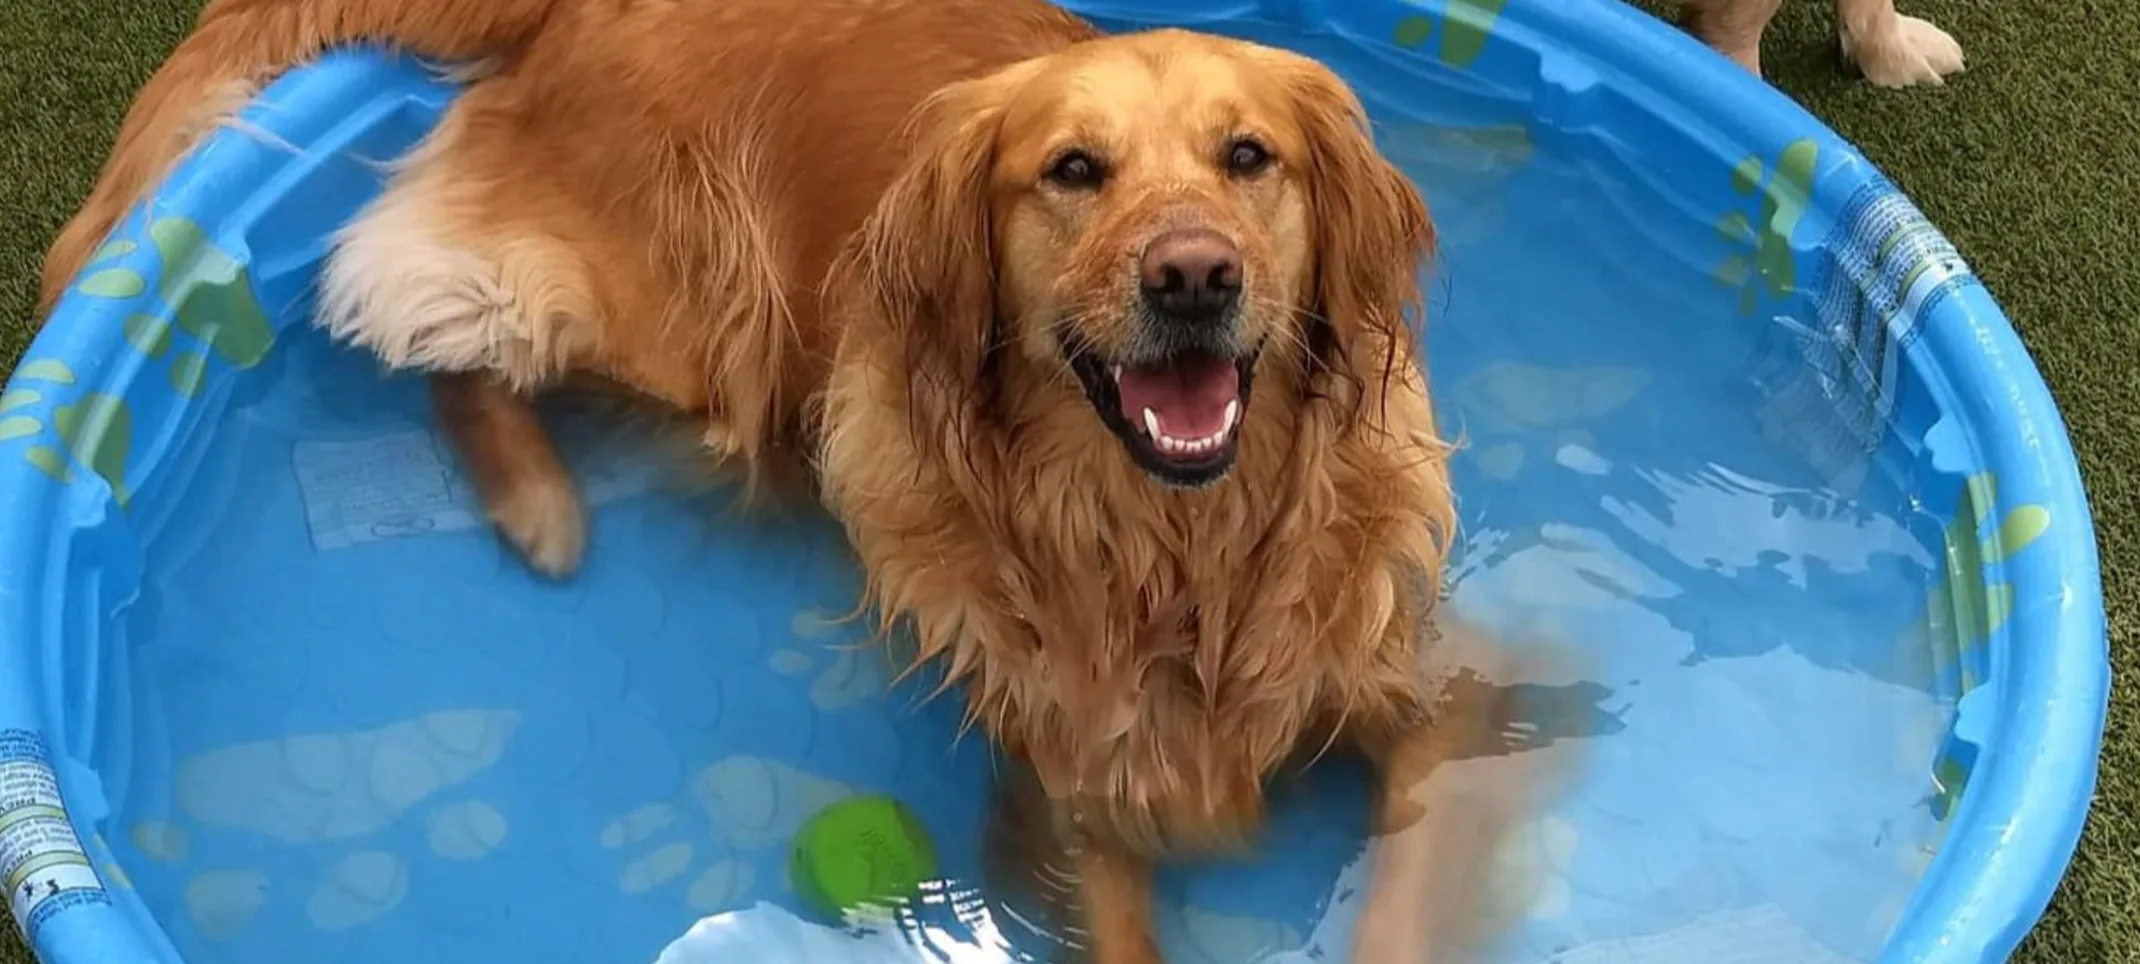 Dog in pool outside